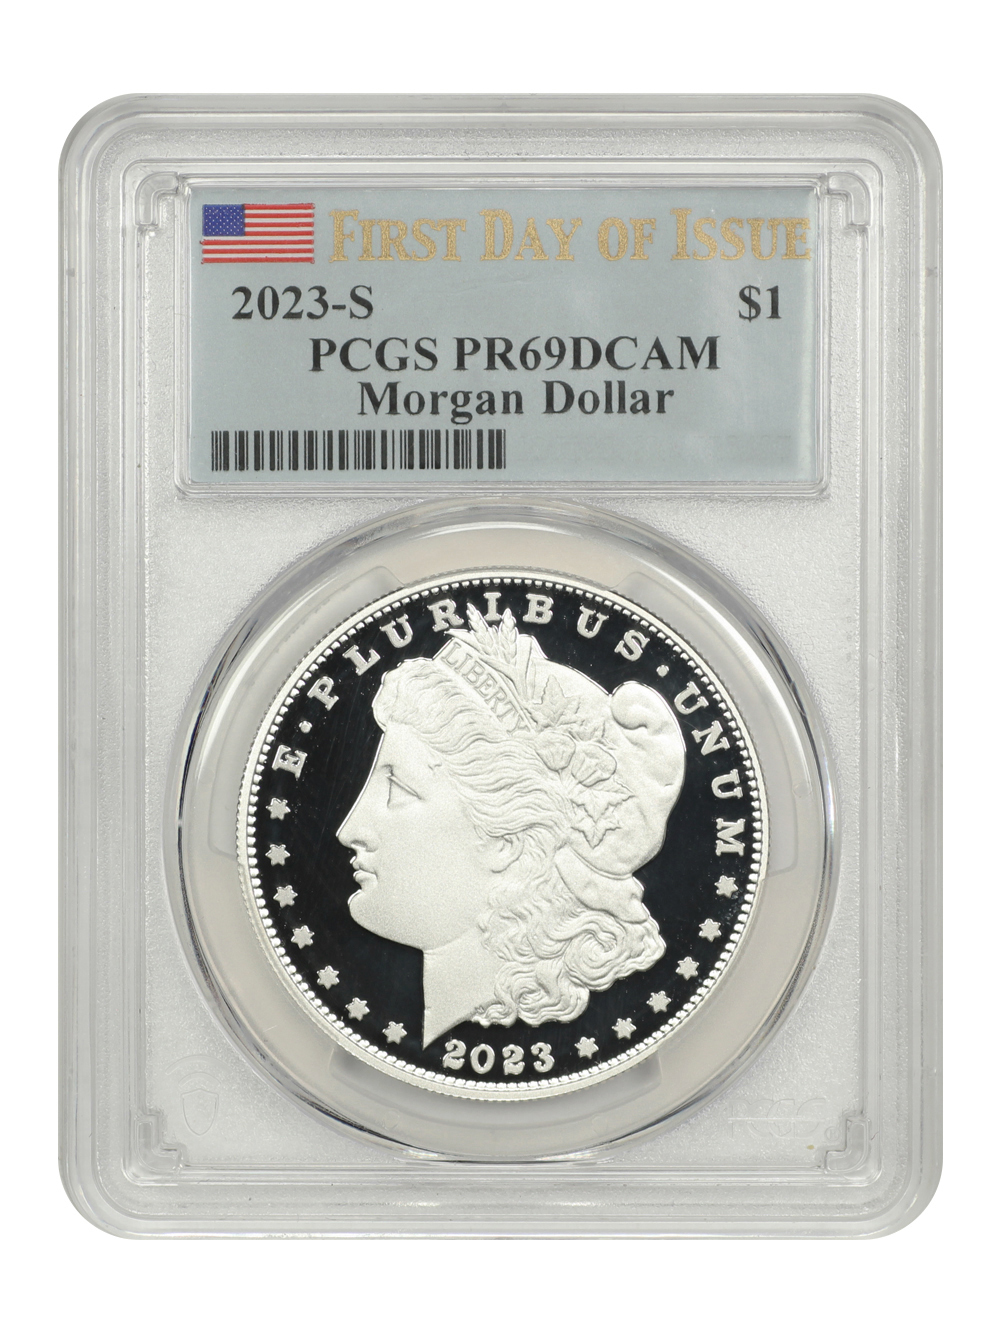 Primary image for 2023-S $1 Morgan Dollar PCGS PR69DCAM (First Day of Issue)